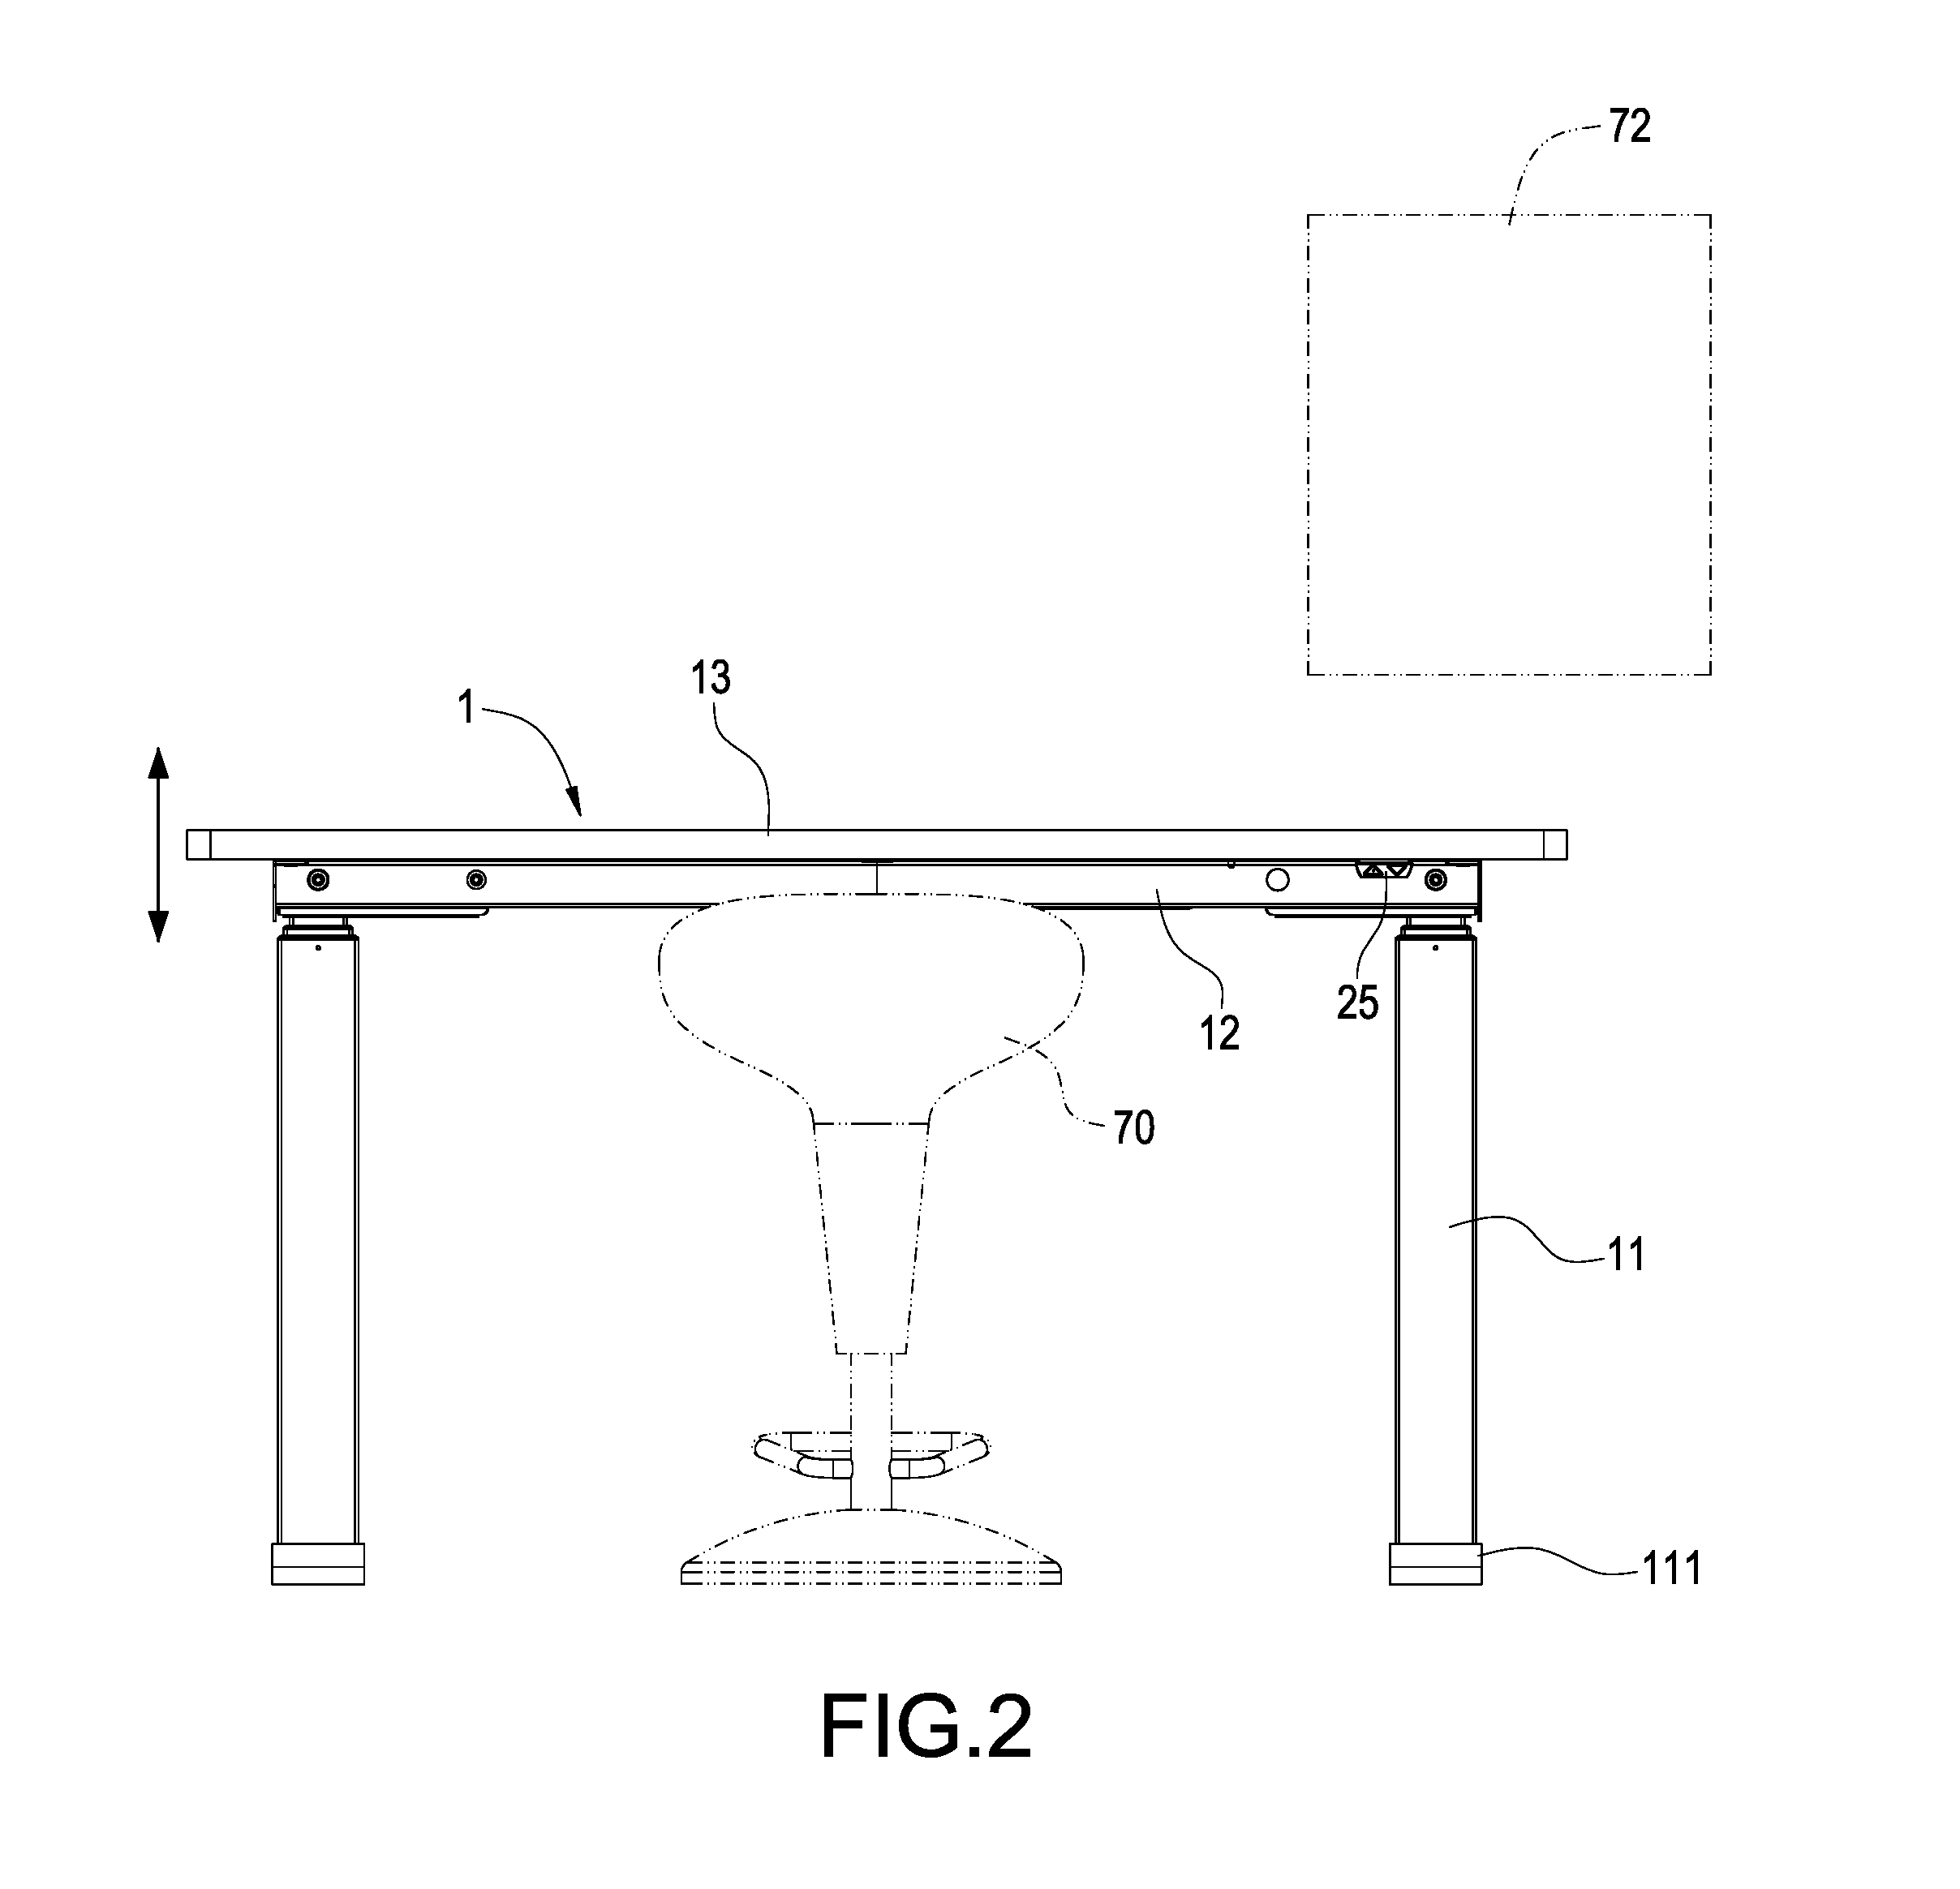 Electrical adjustable table and control method for electrical adjustable table